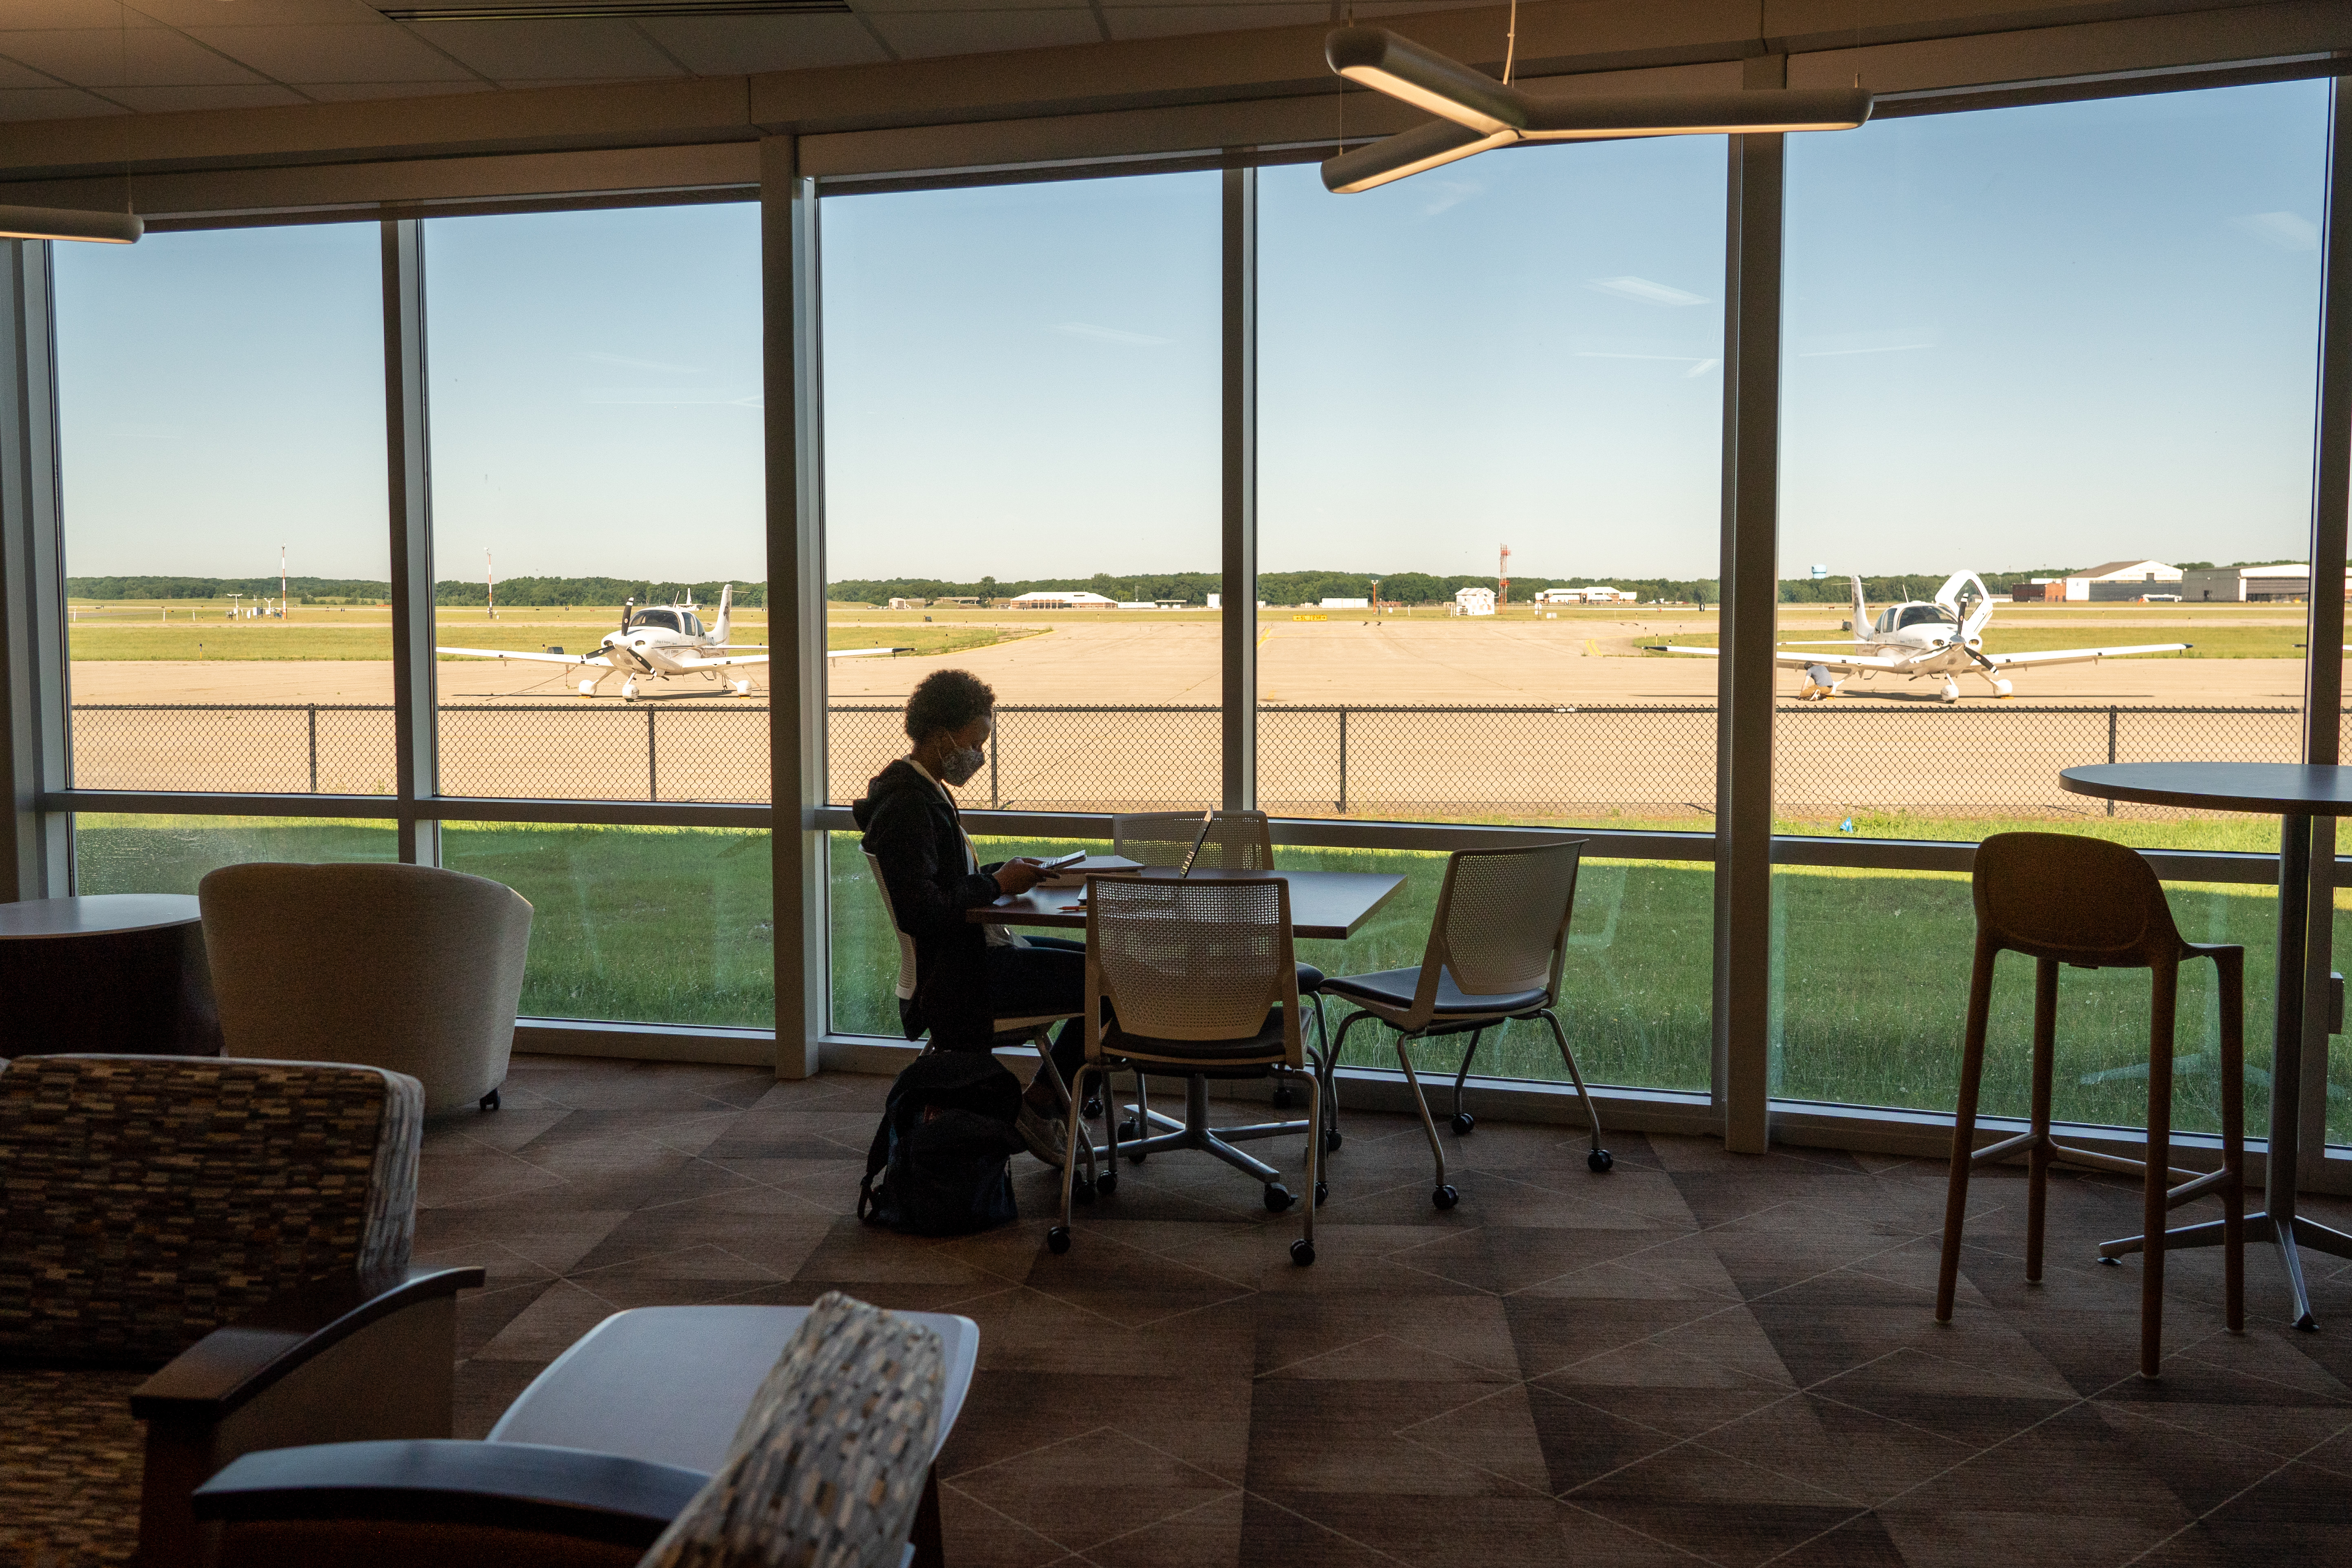 Adaora Osolu sits at a table next to windows that look out over the runway.